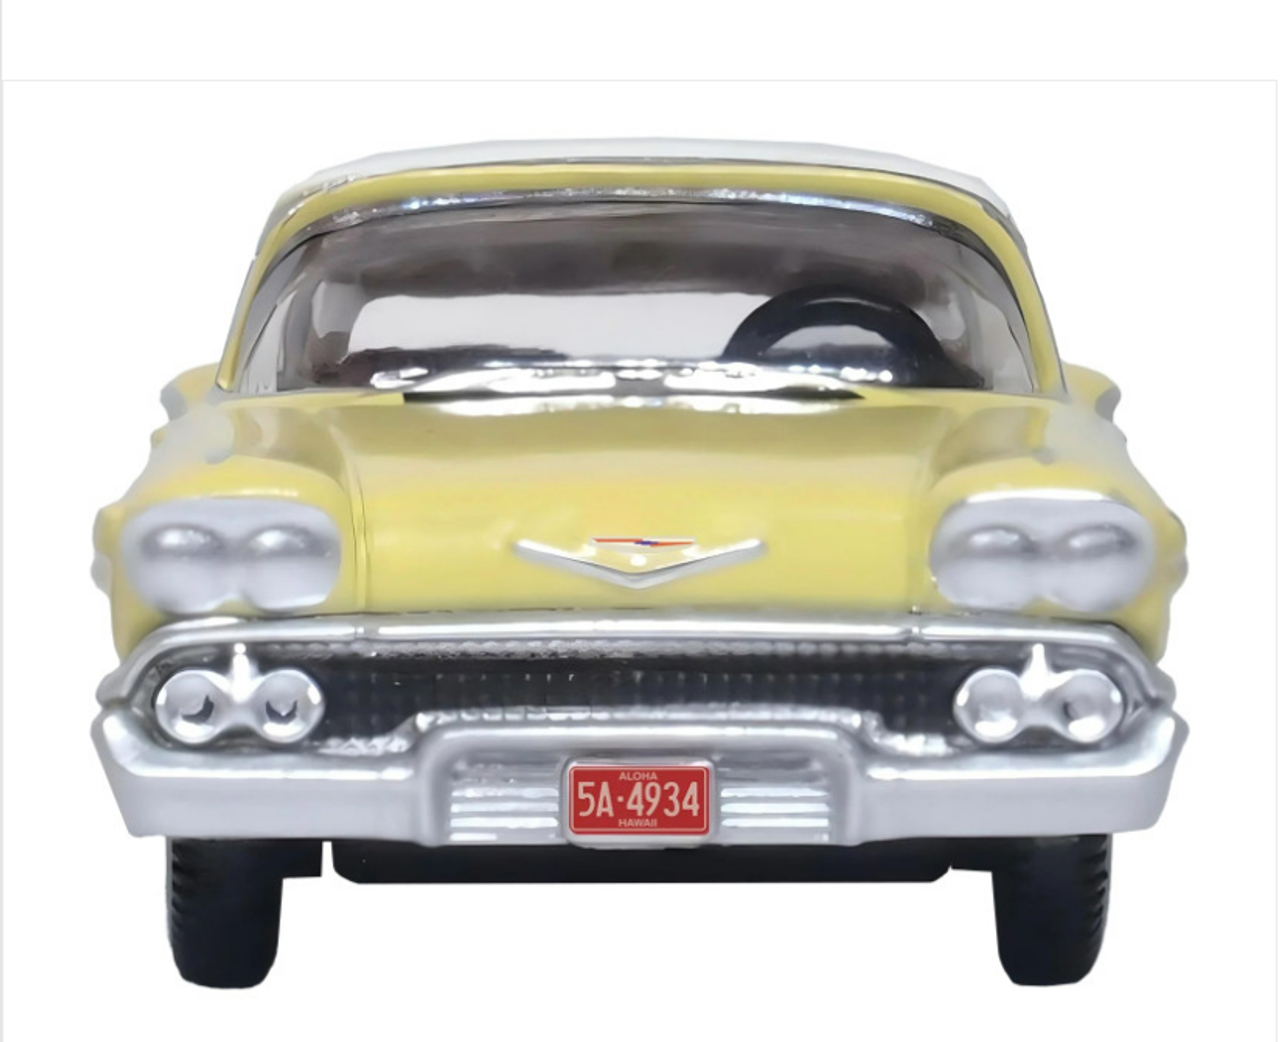 1958 Chevrolet Impala Sport Colonial Cream with Snowcrest White Top 1/87 (HO) Scale Diecast Model Car by Oxford Diecast